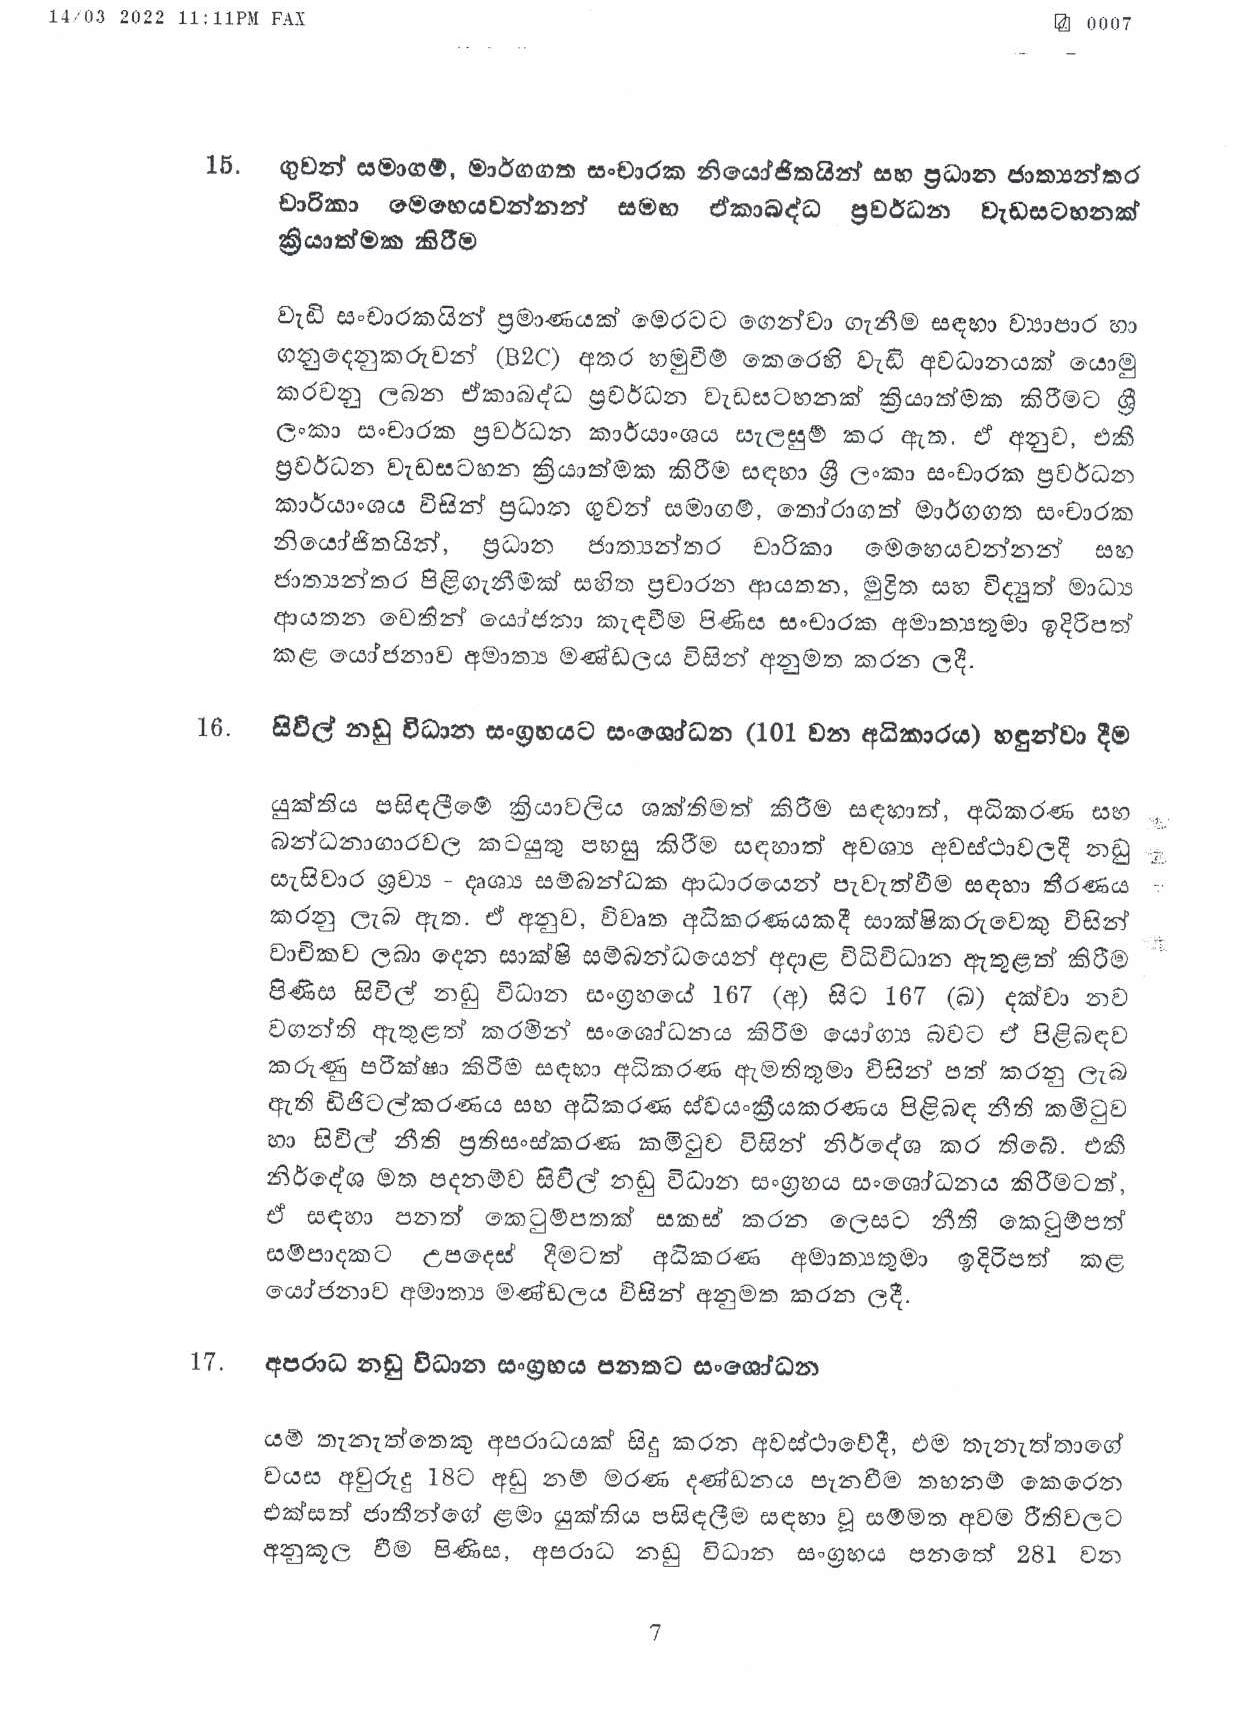 Cabinet Decision on 14.03.2022 page 007